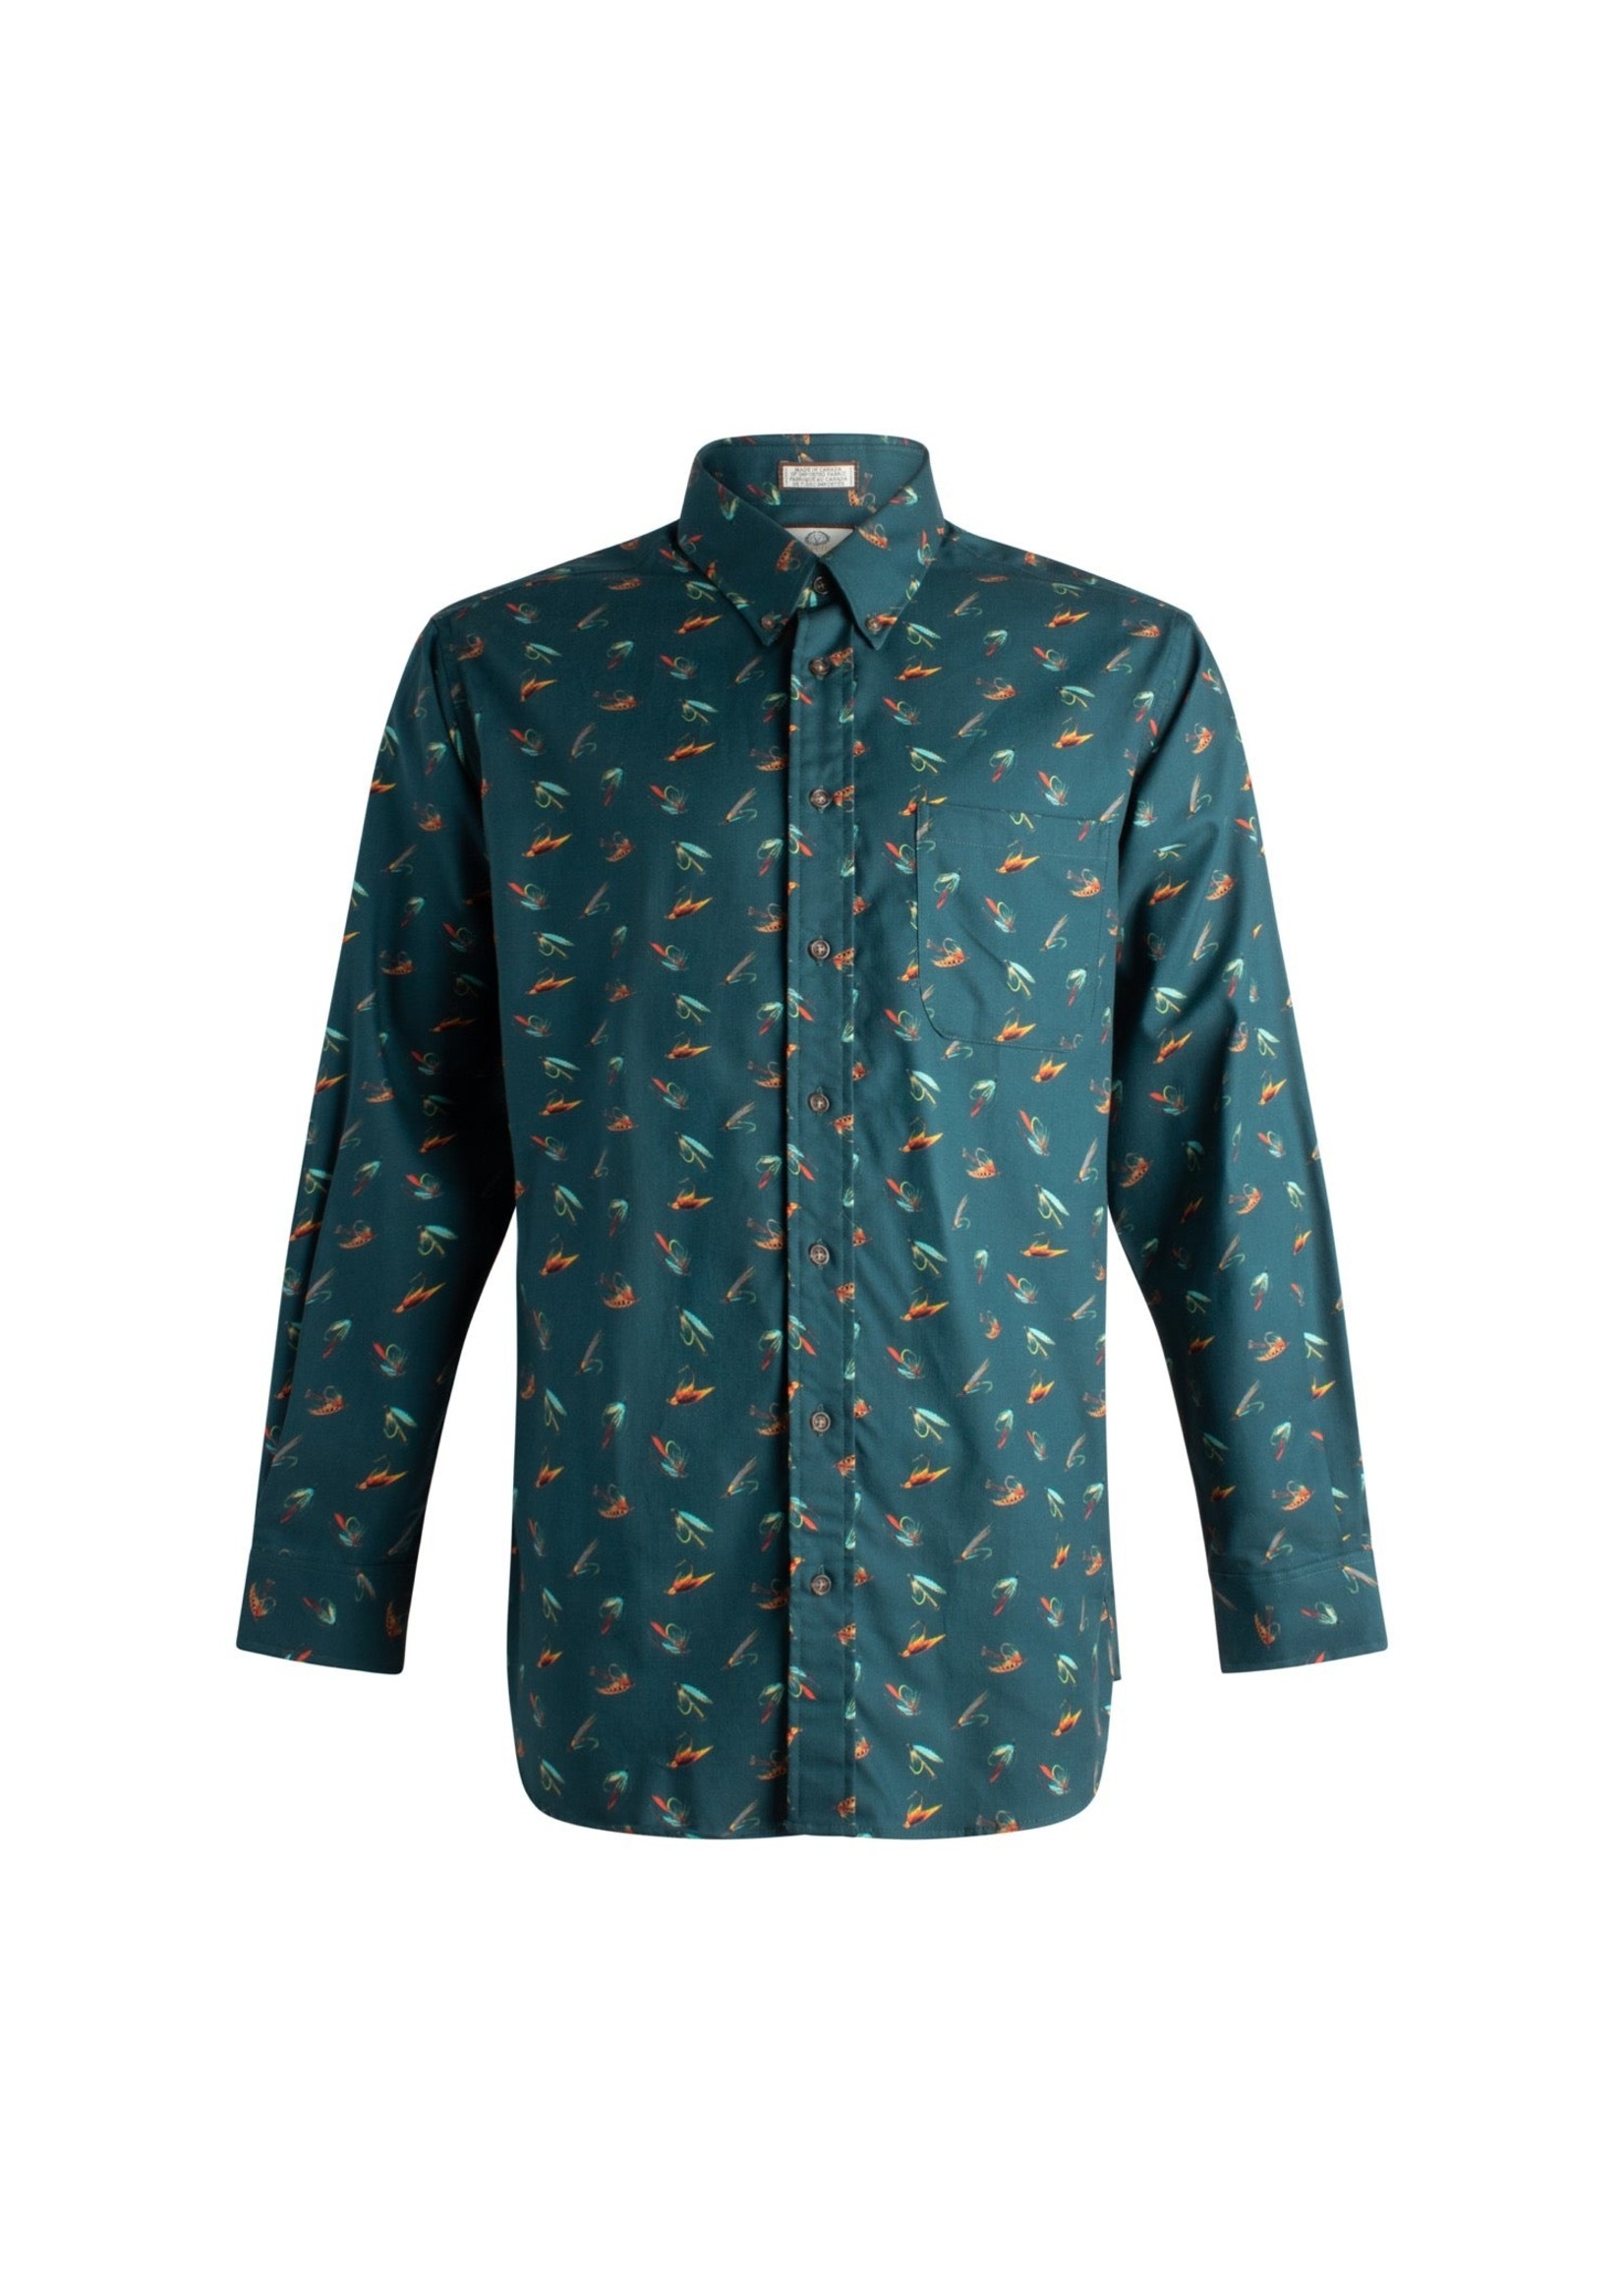 VIYELLA PINE GREEN FLY FISHING PATTERN LIMITED EDITION COTTON AND WOOL BLEND BUTTON-DOWN SHIRT